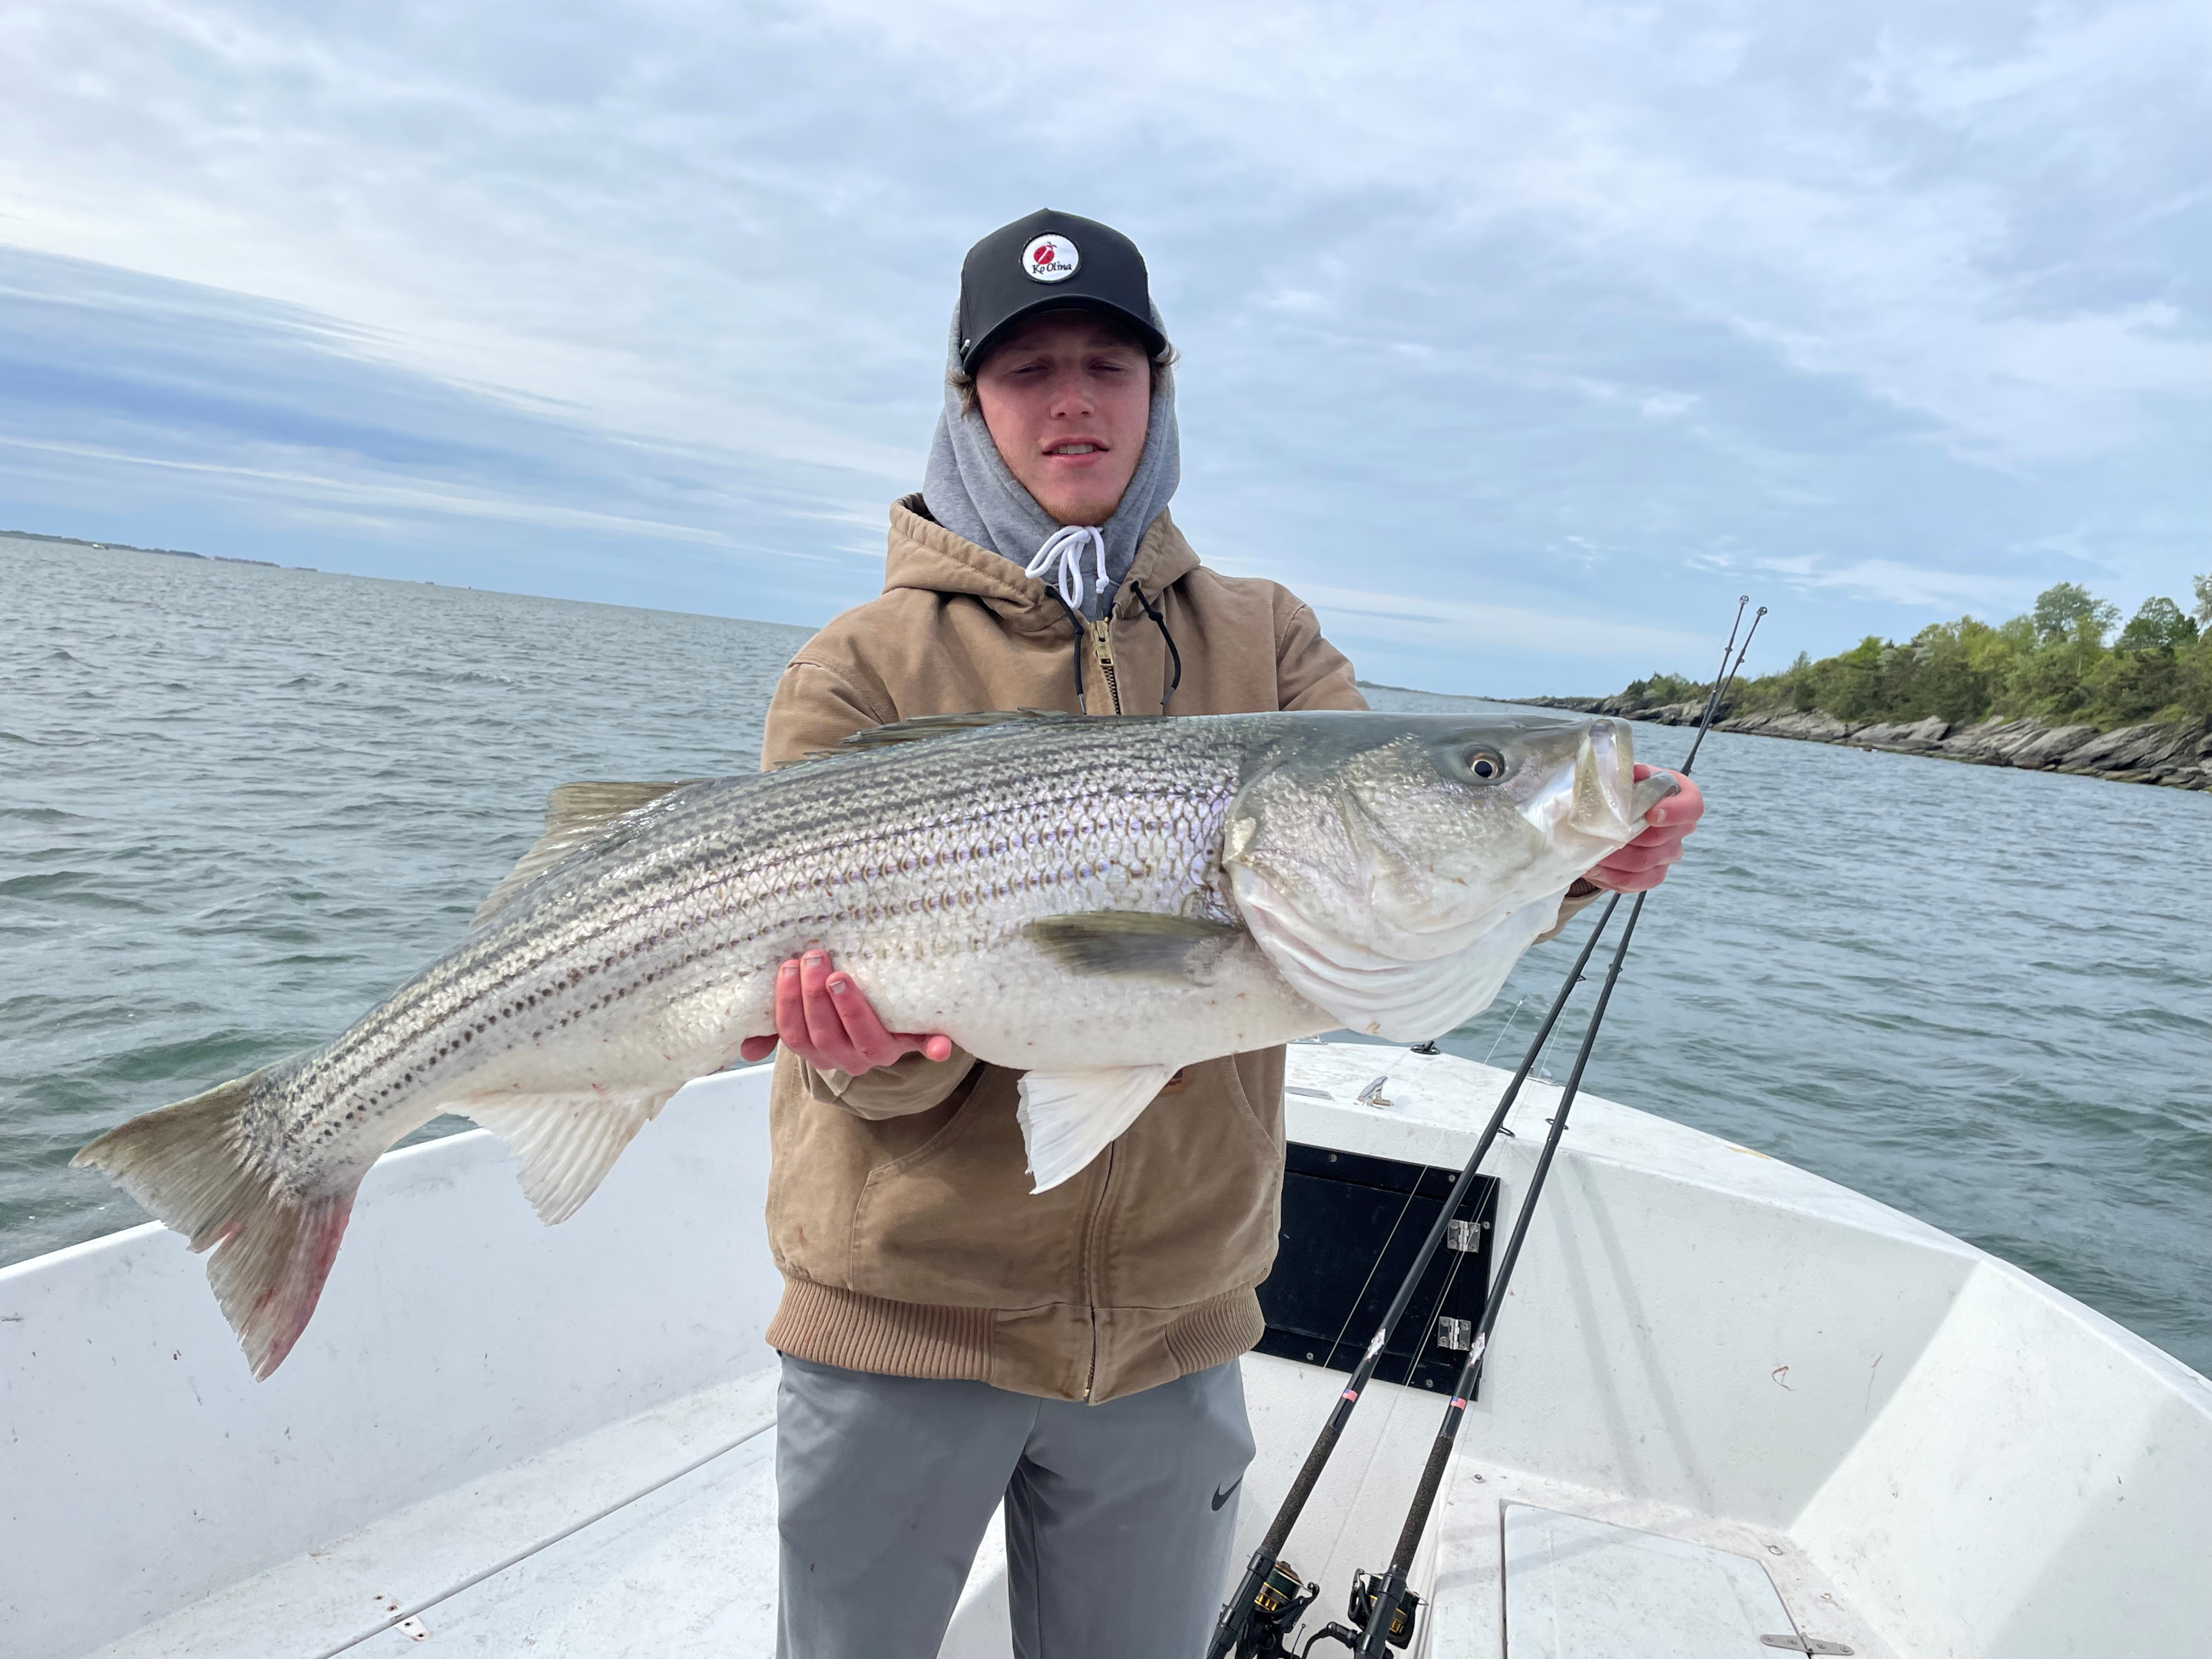 A photo of a Striped Bass caught during Cape Cod fishing, as reported in the cape cod fishing report